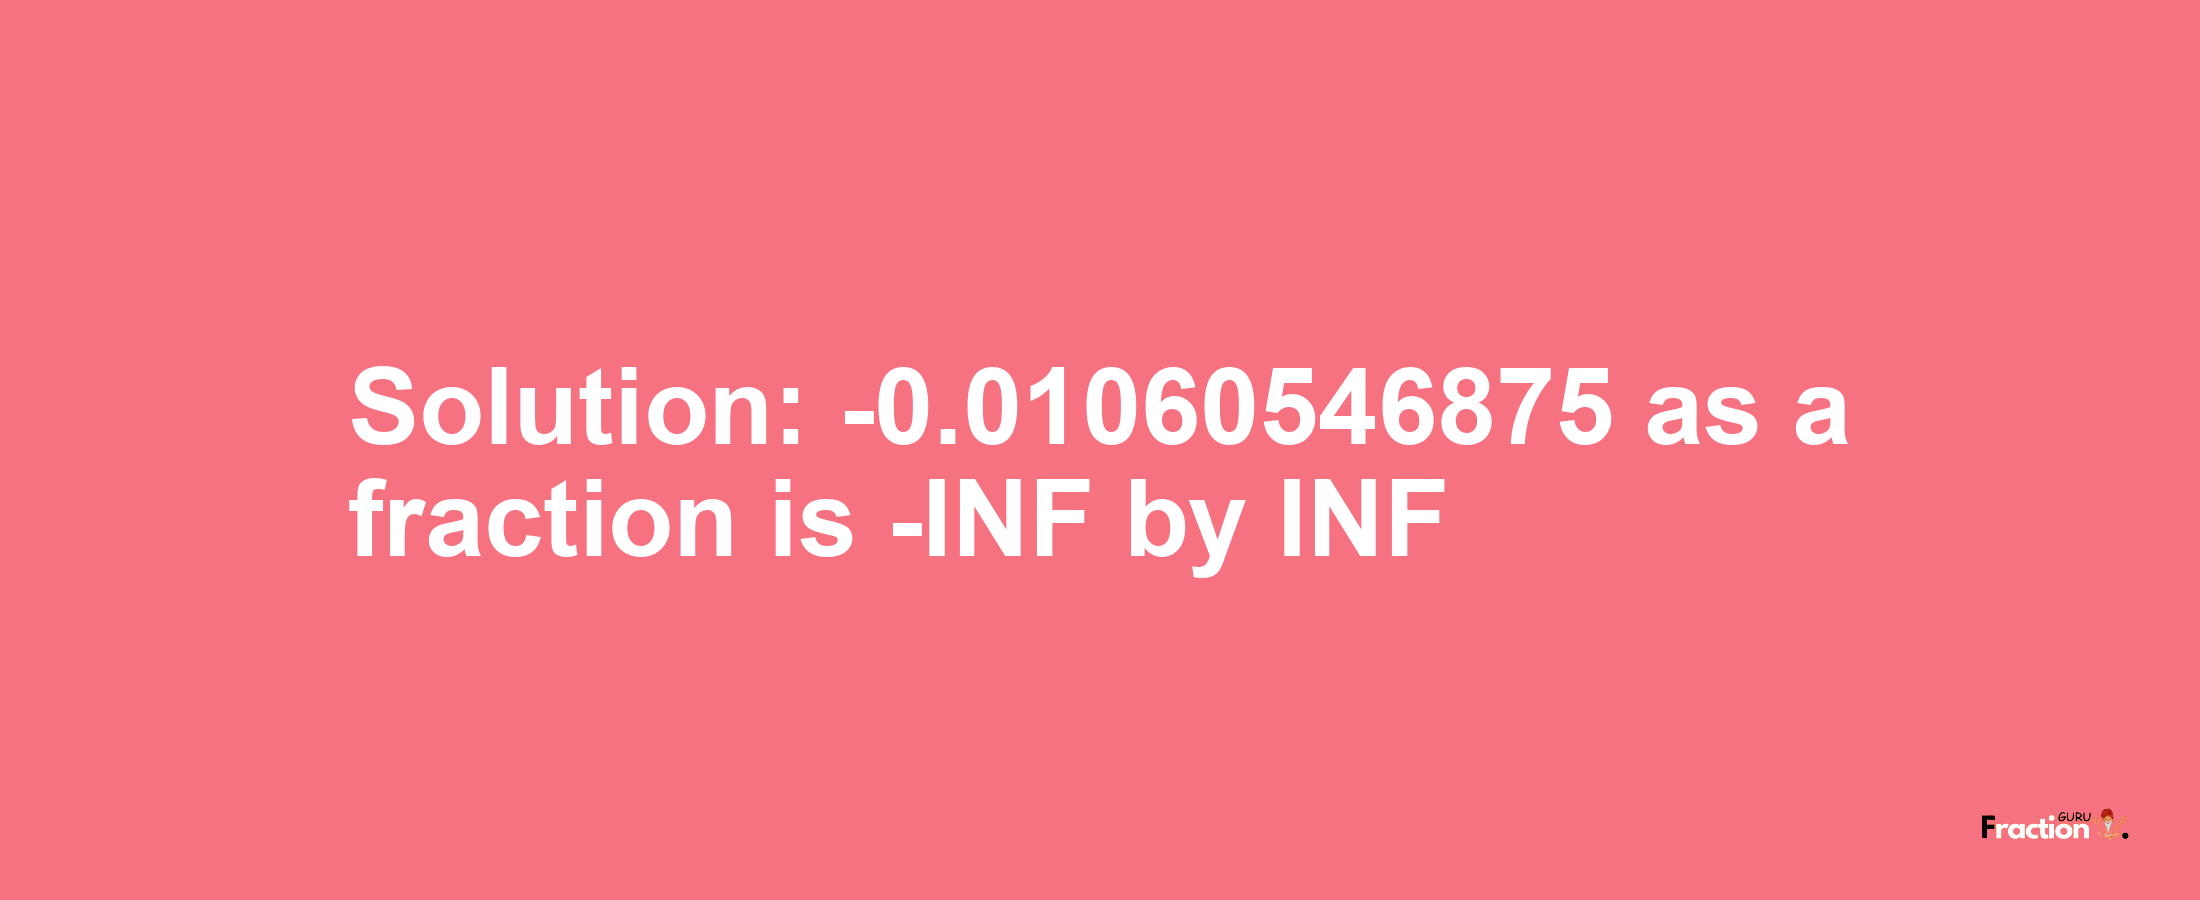 Solution:-0.01060546875 as a fraction is -INF/INF